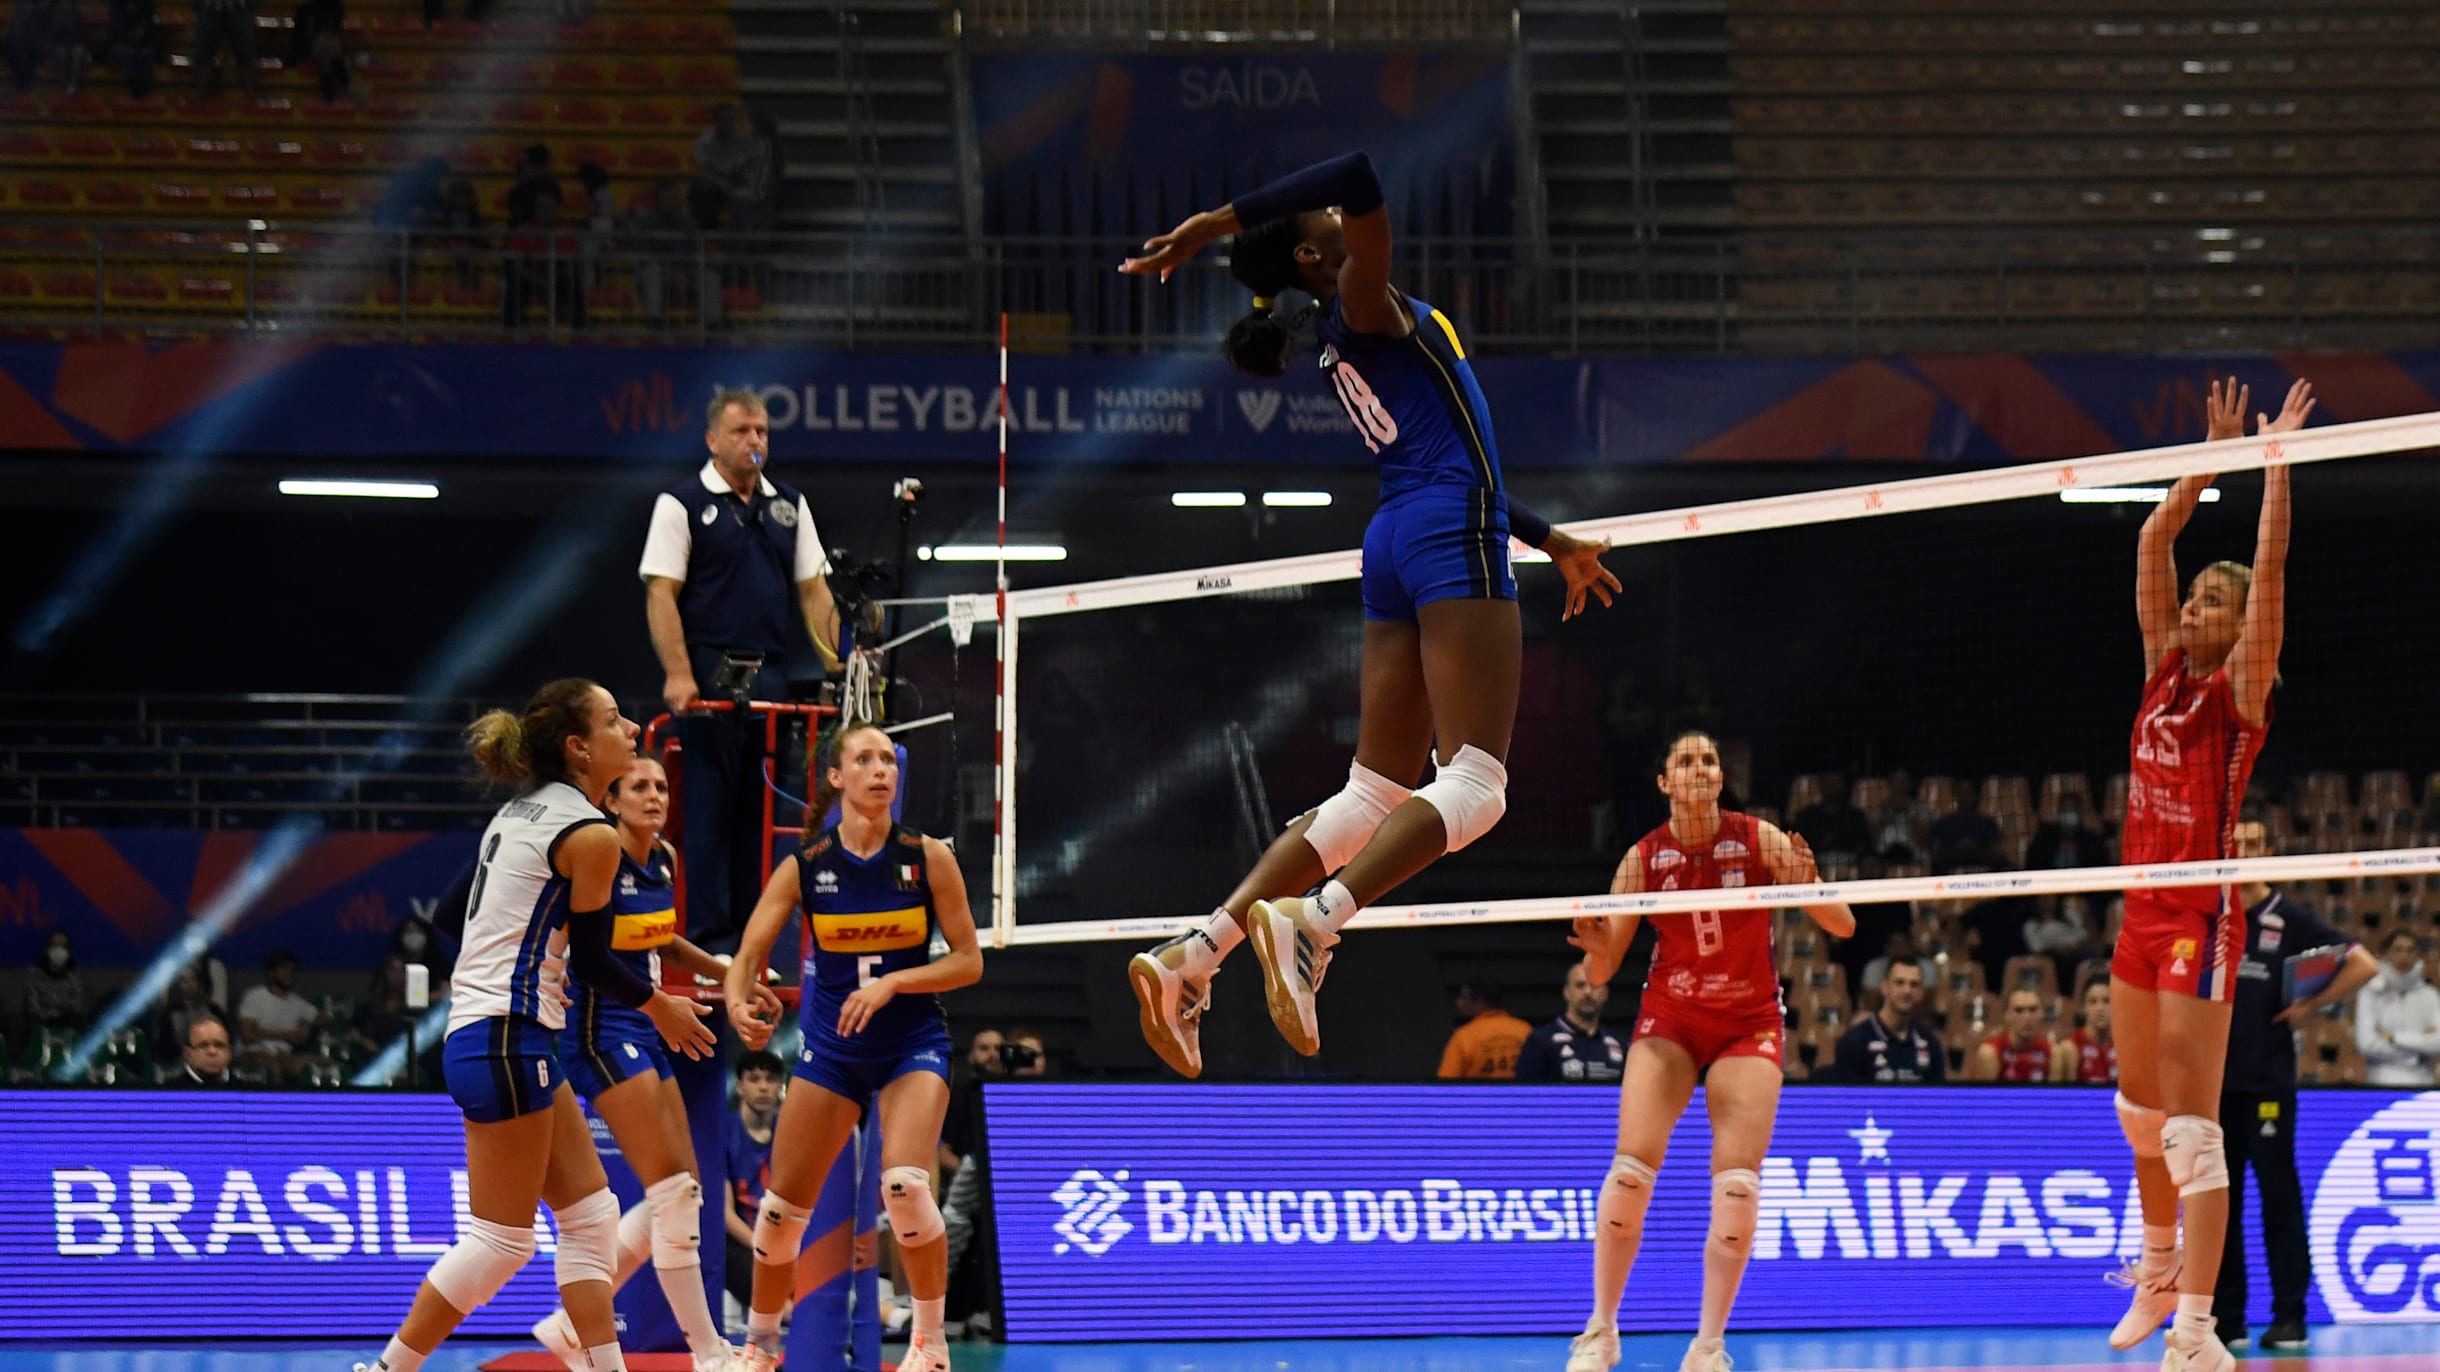 streaming volleyball nations league